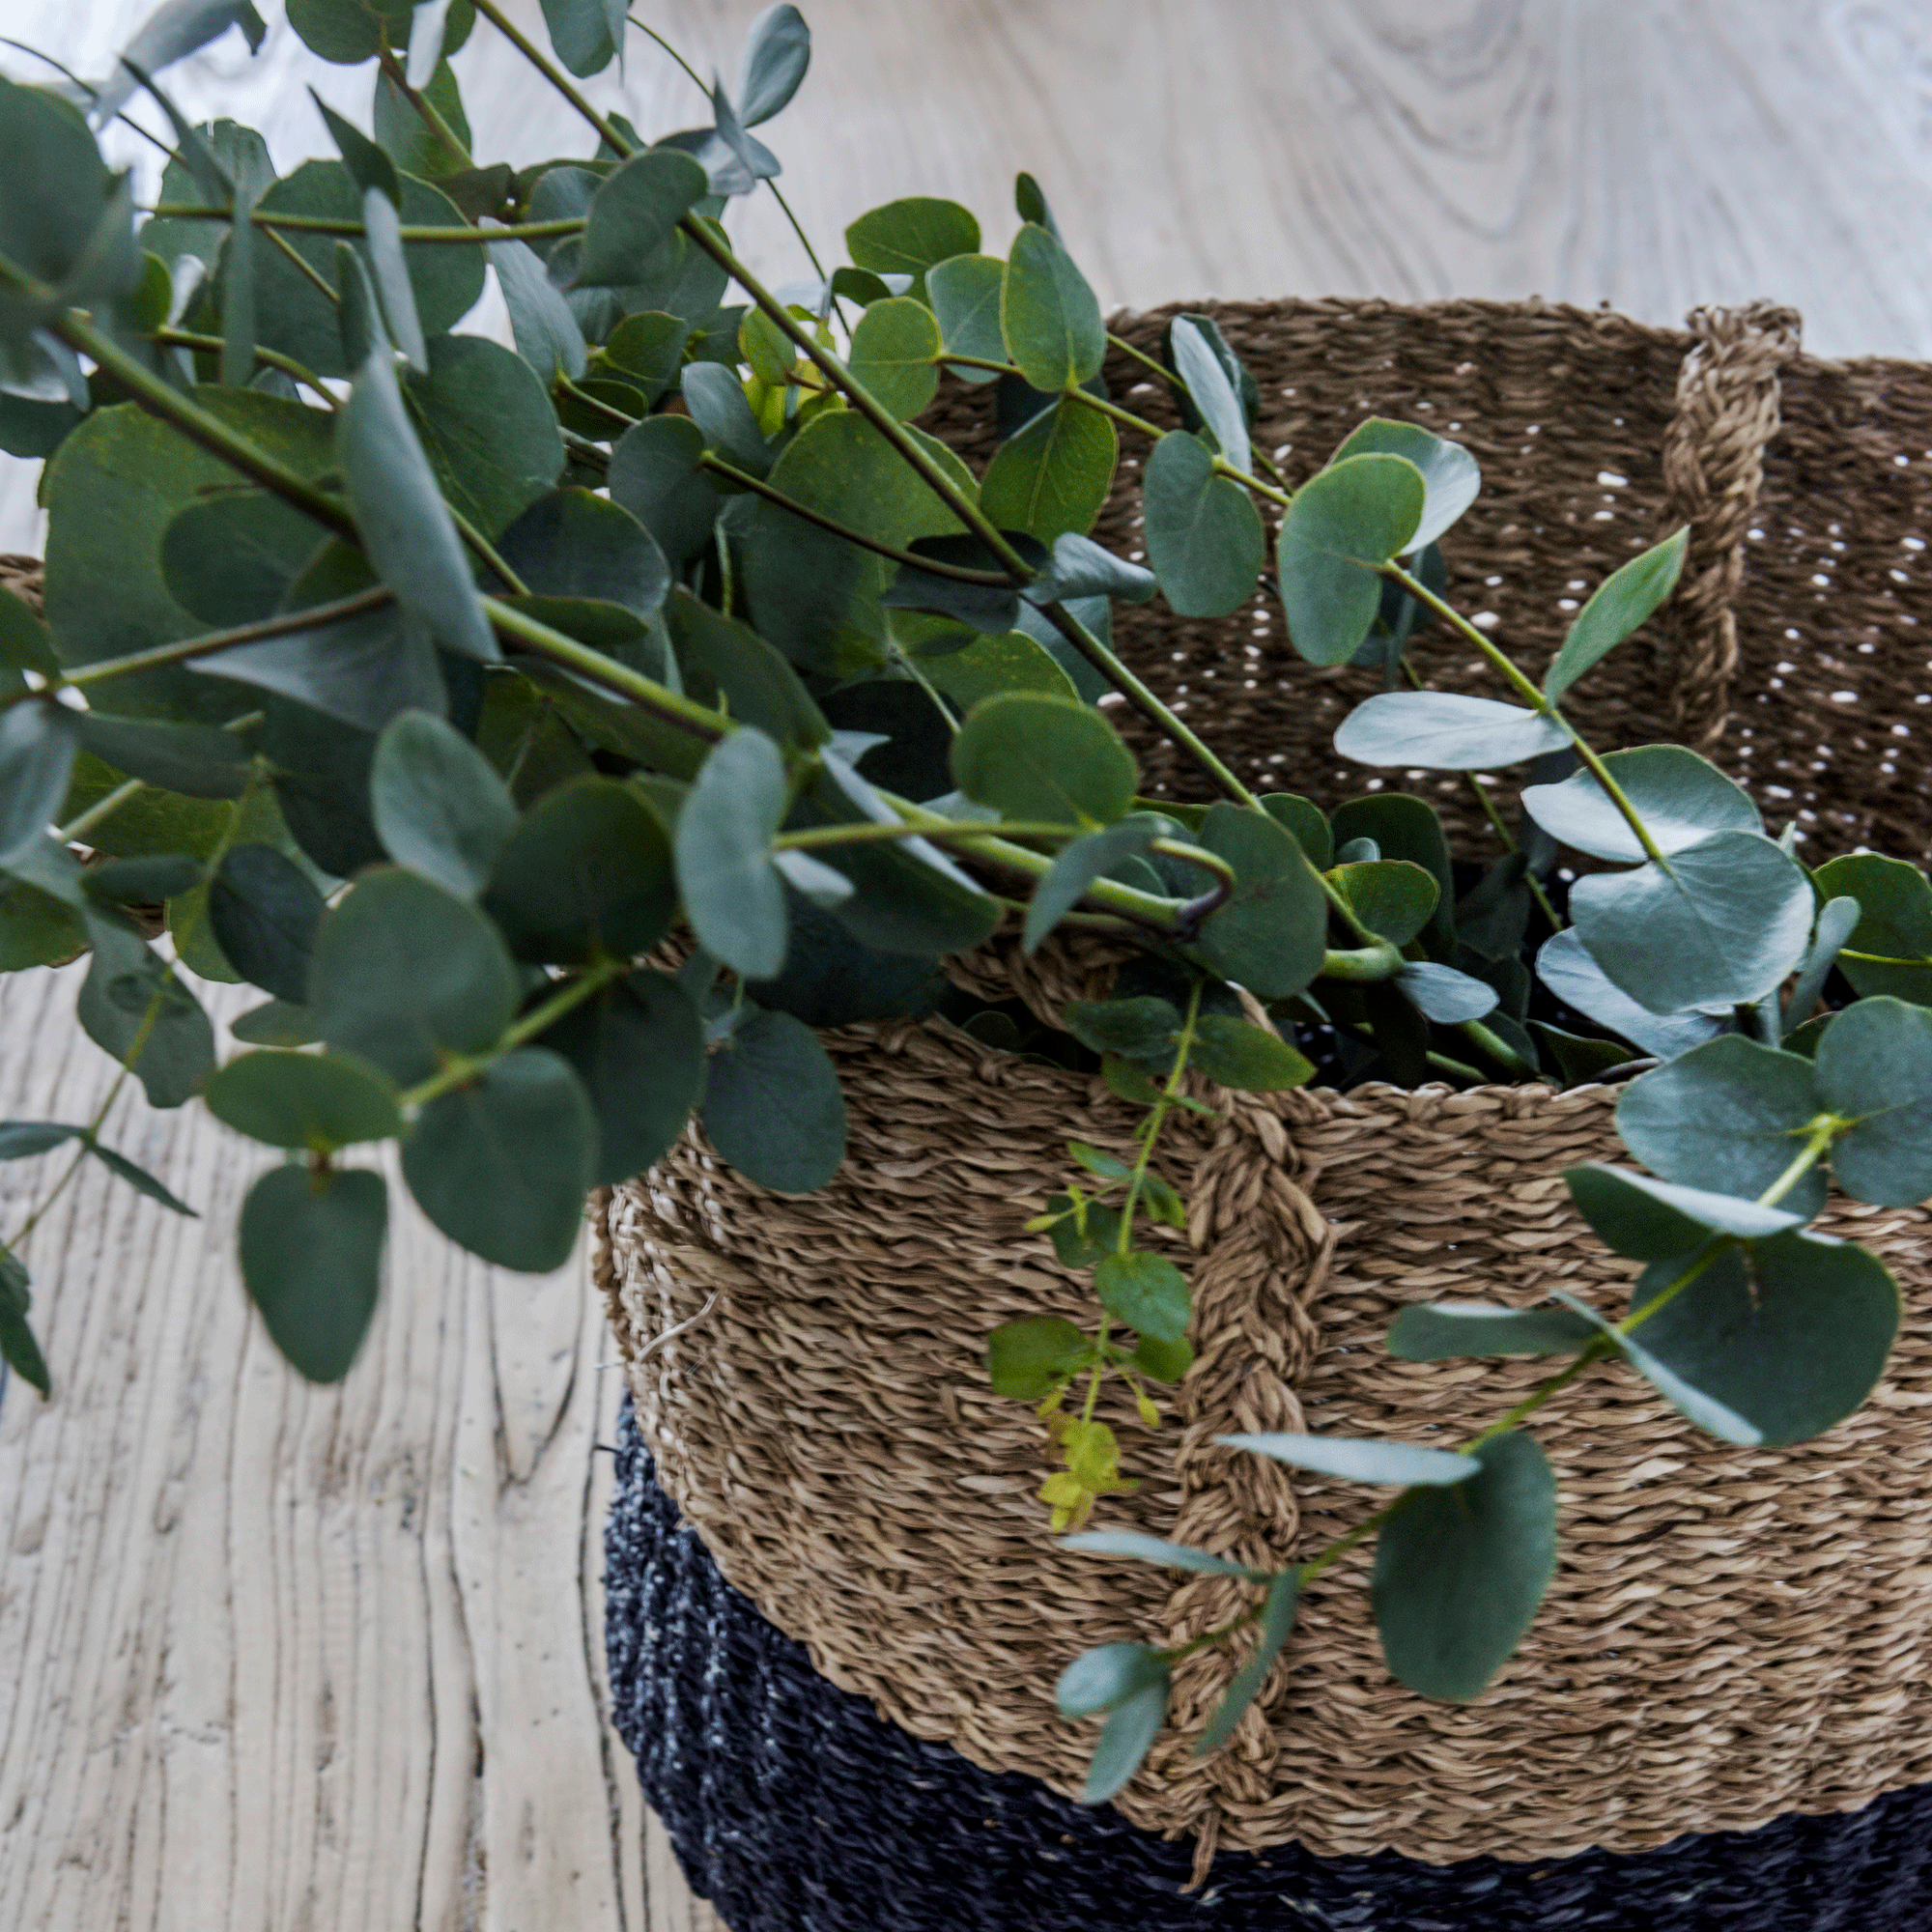 Don’t bother buying a brand new plant - this is how to propagate eucalyptus at home